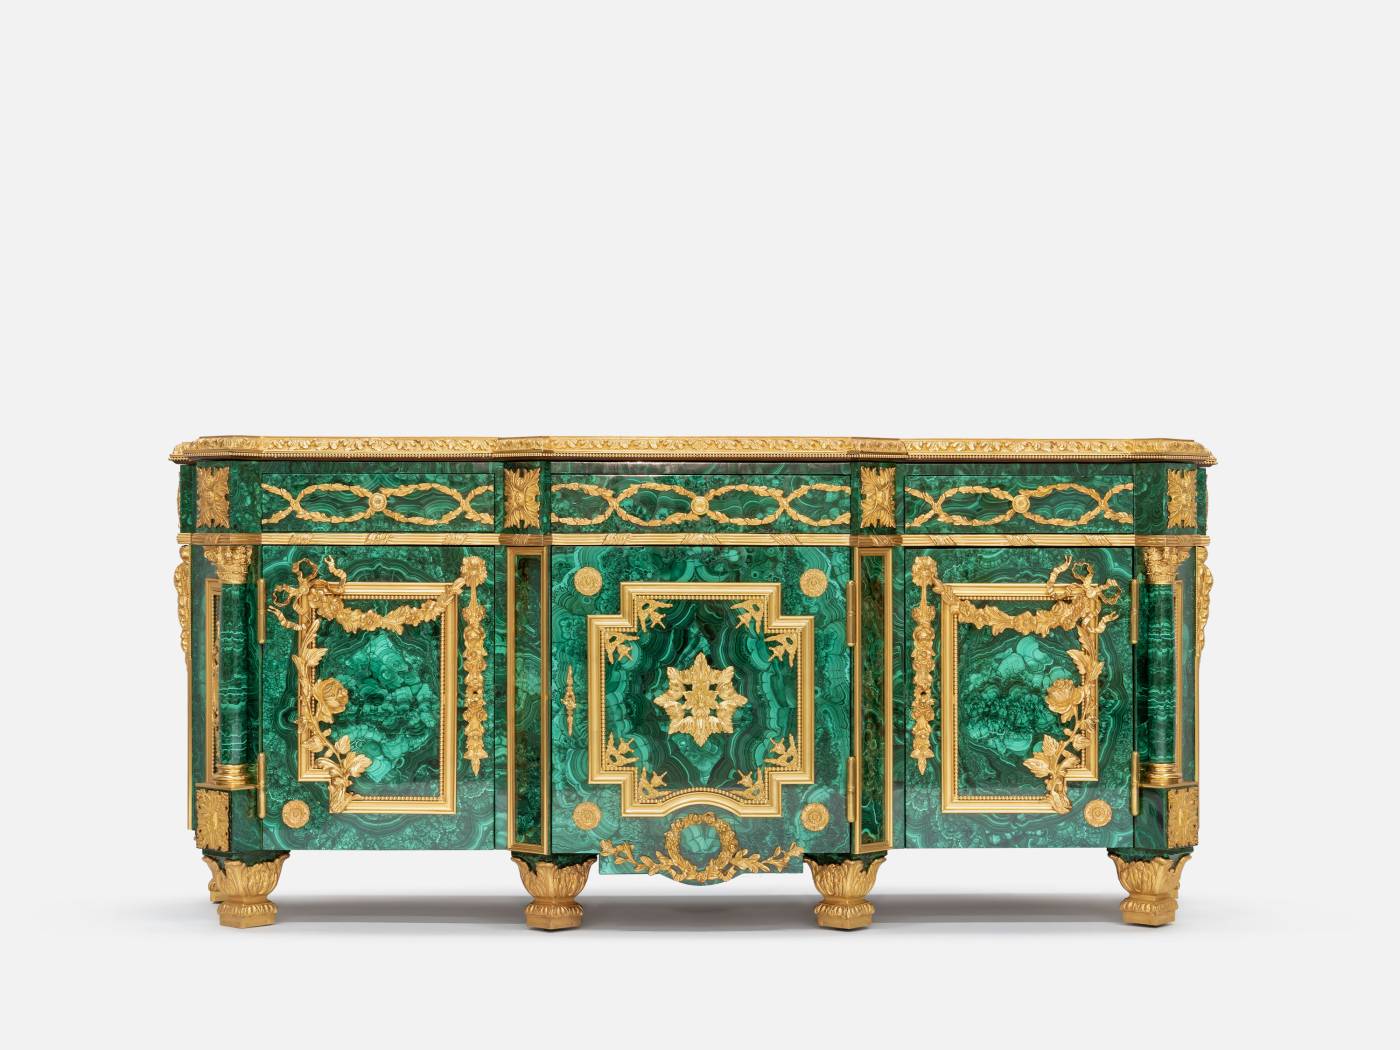 ART. 2334 – The elegance of luxury classic Sideboards made in Italy by C.G. Capelletti.